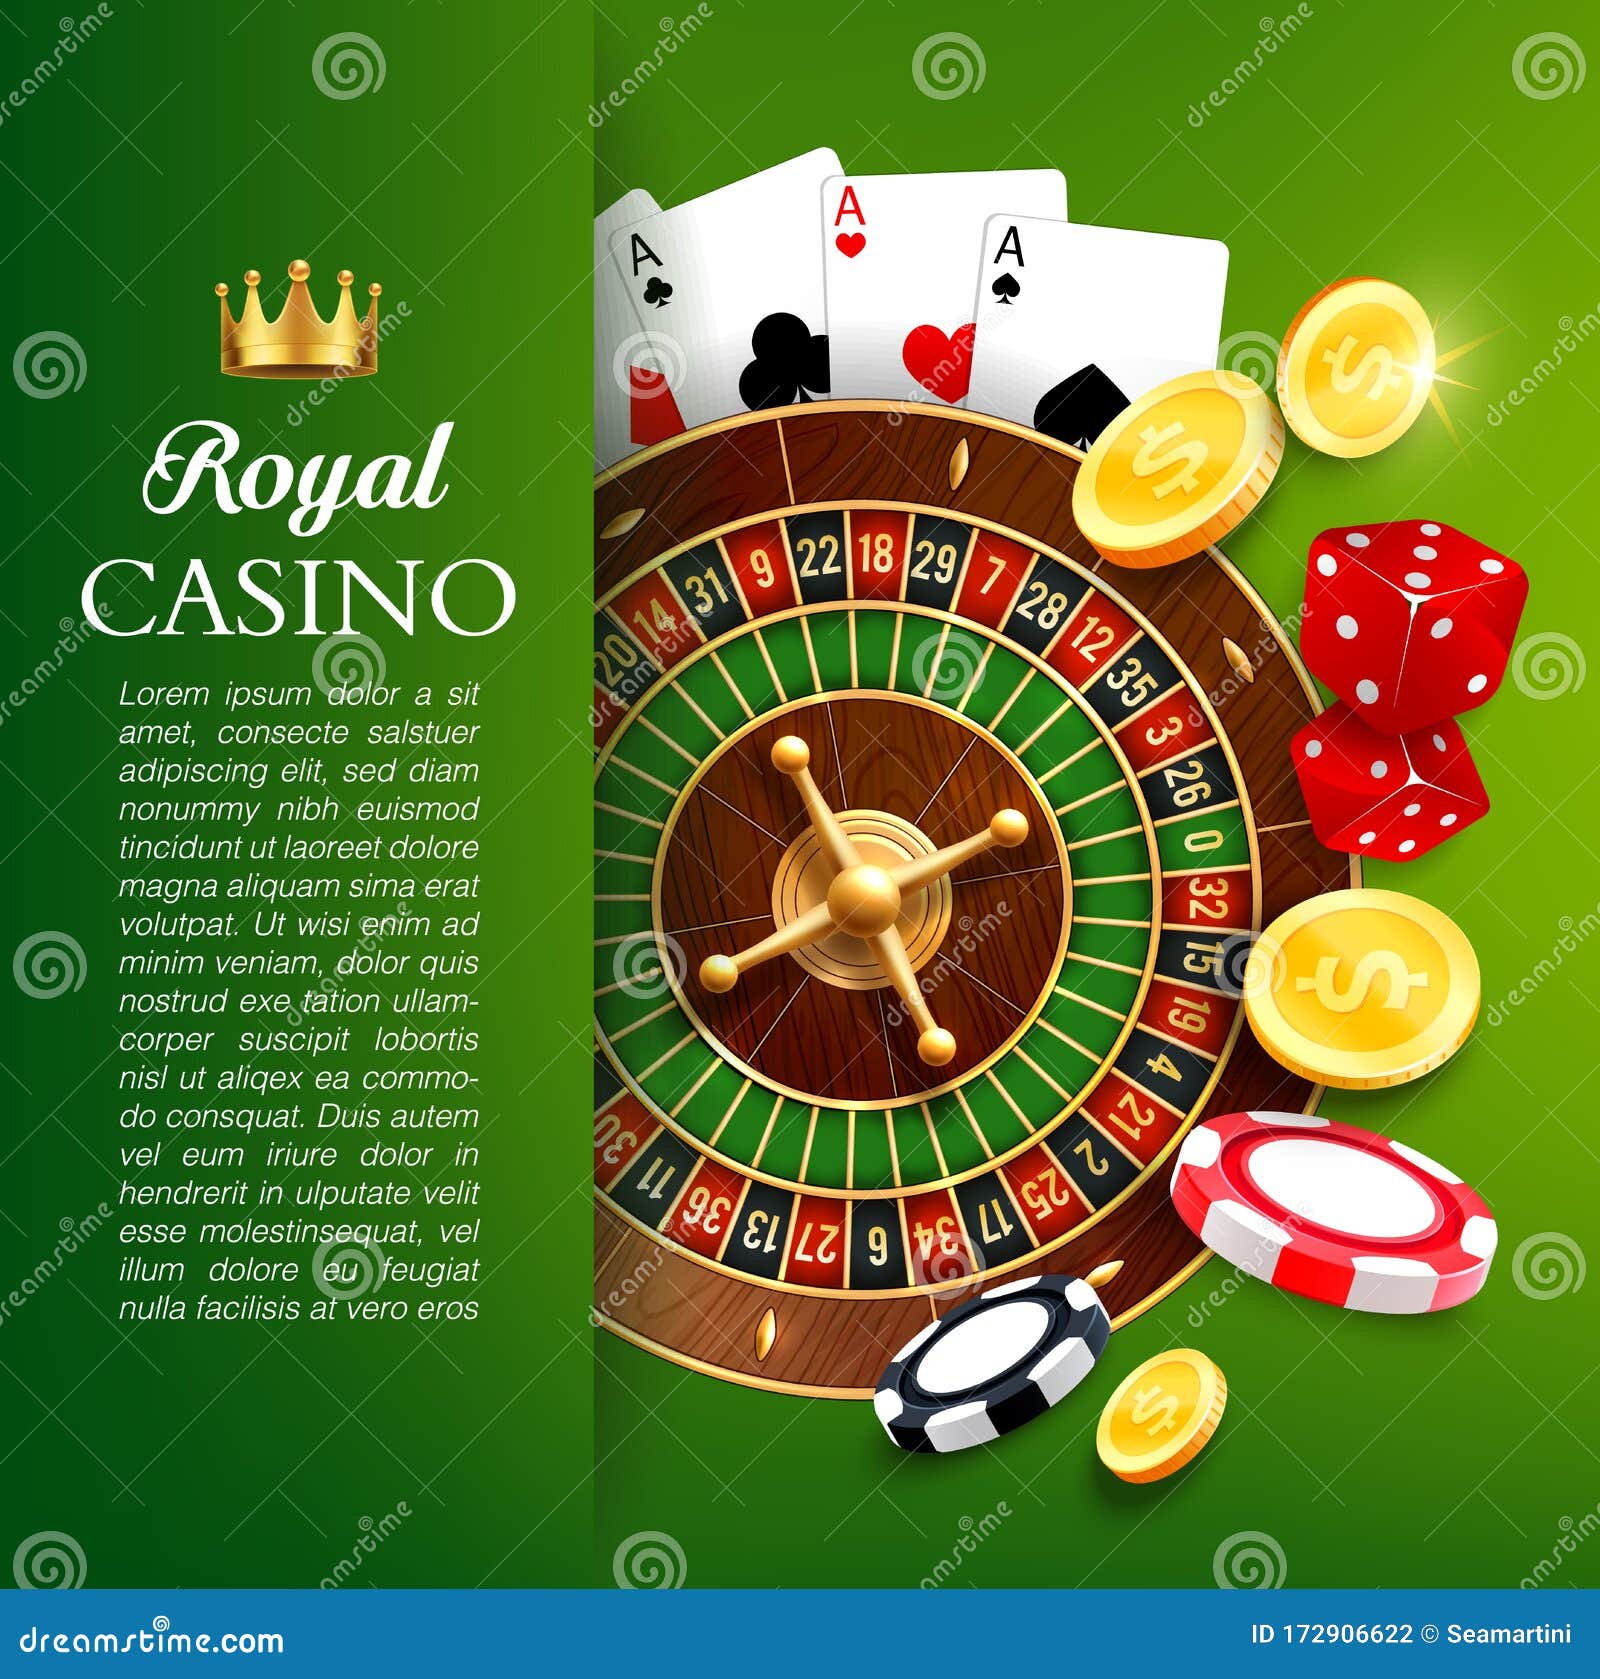 Is Online Casino Tournaments in India: A Guide to Winning Big Making Me Rich?